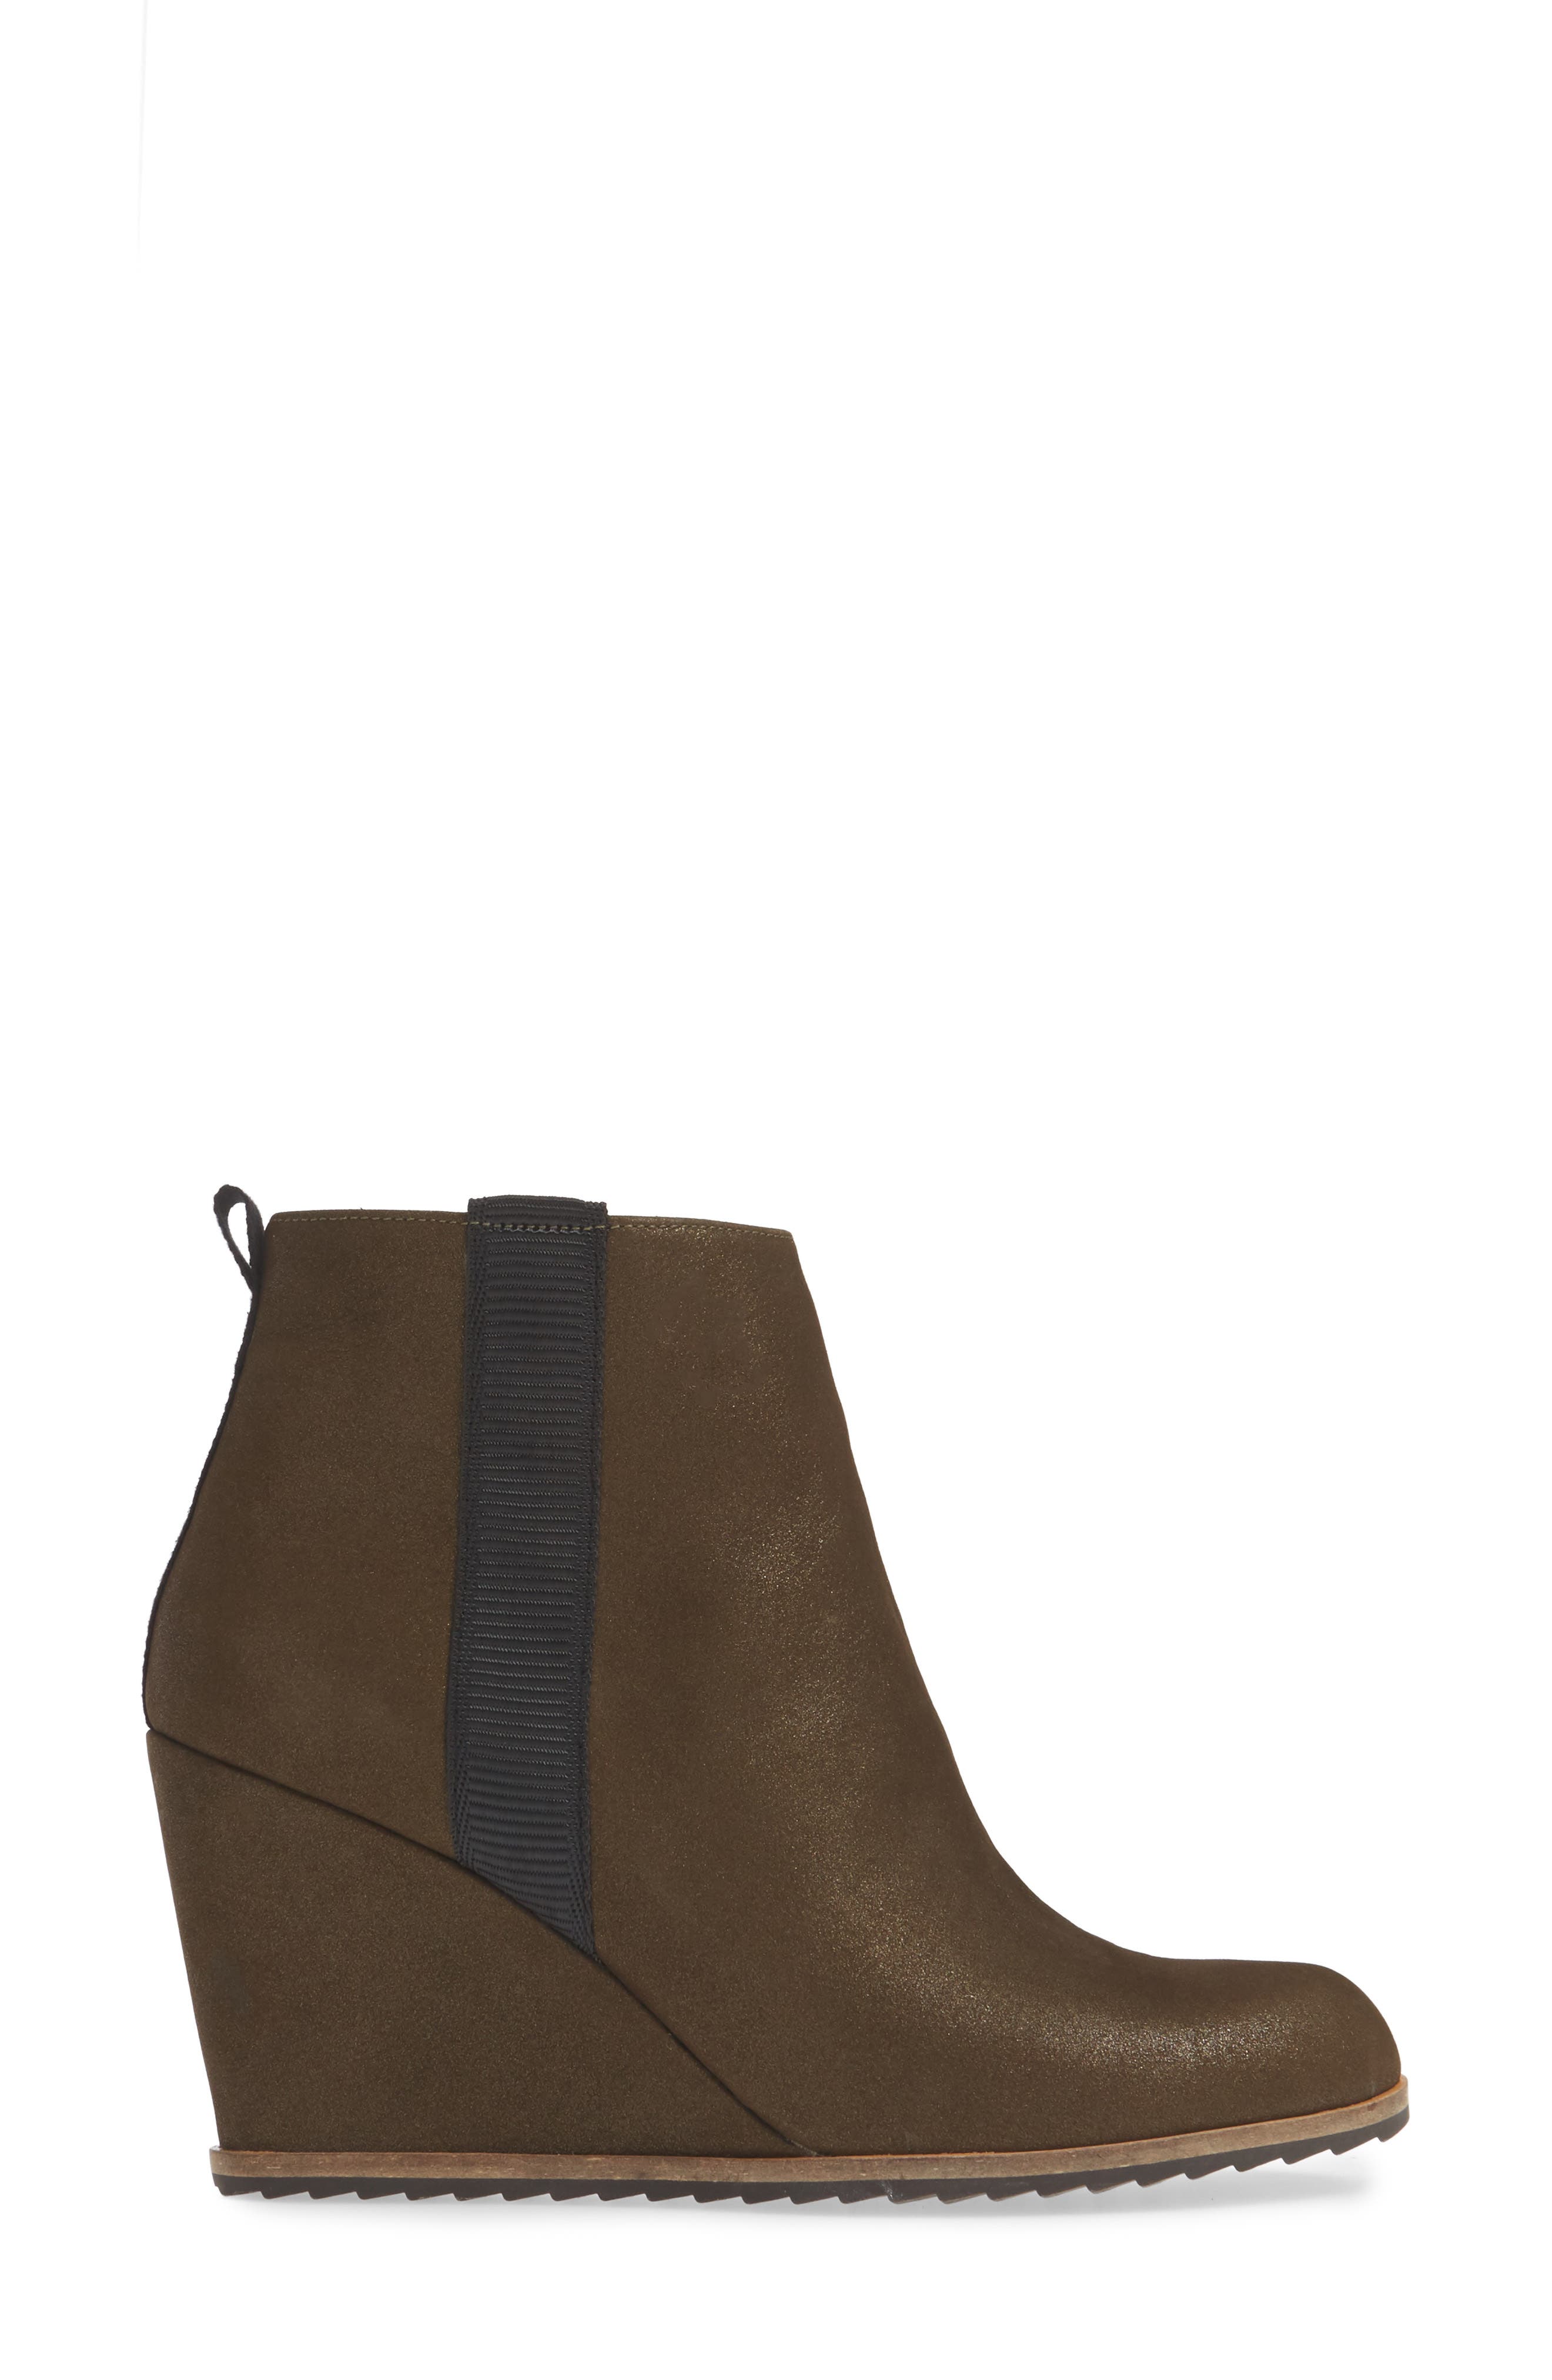 Linea Paolo | Winslet Wedge Bootie 